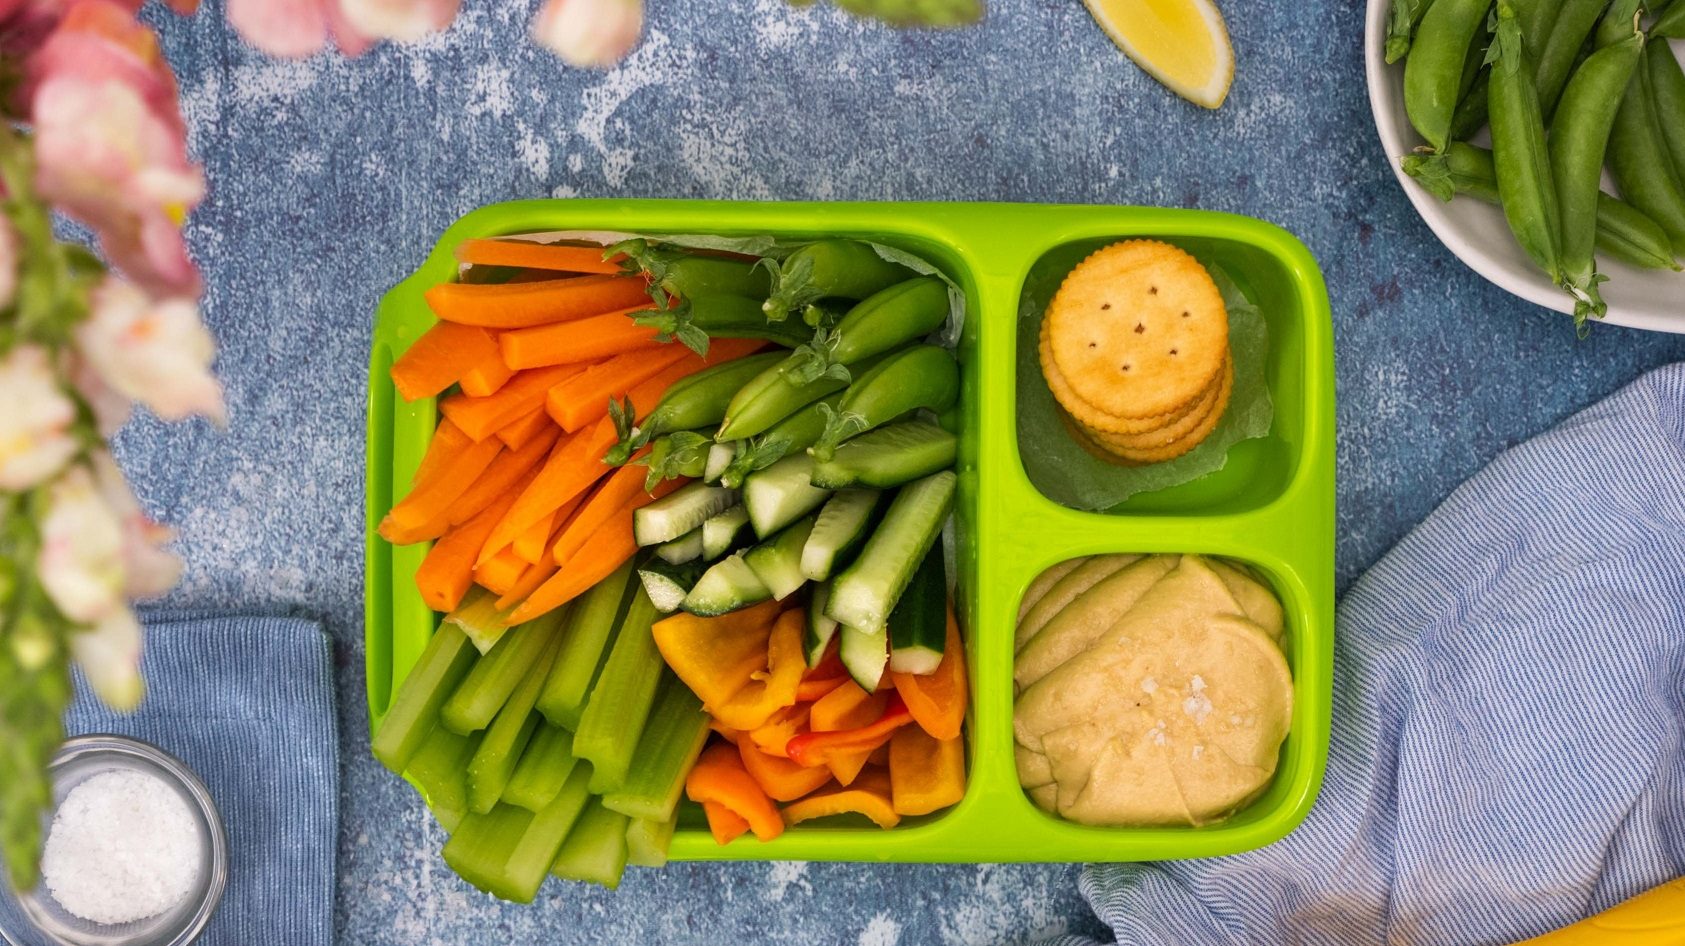 PeaNOT butter hummus, crackers and a variety of fresh vegetable sticks in a green kids' lunchbox.